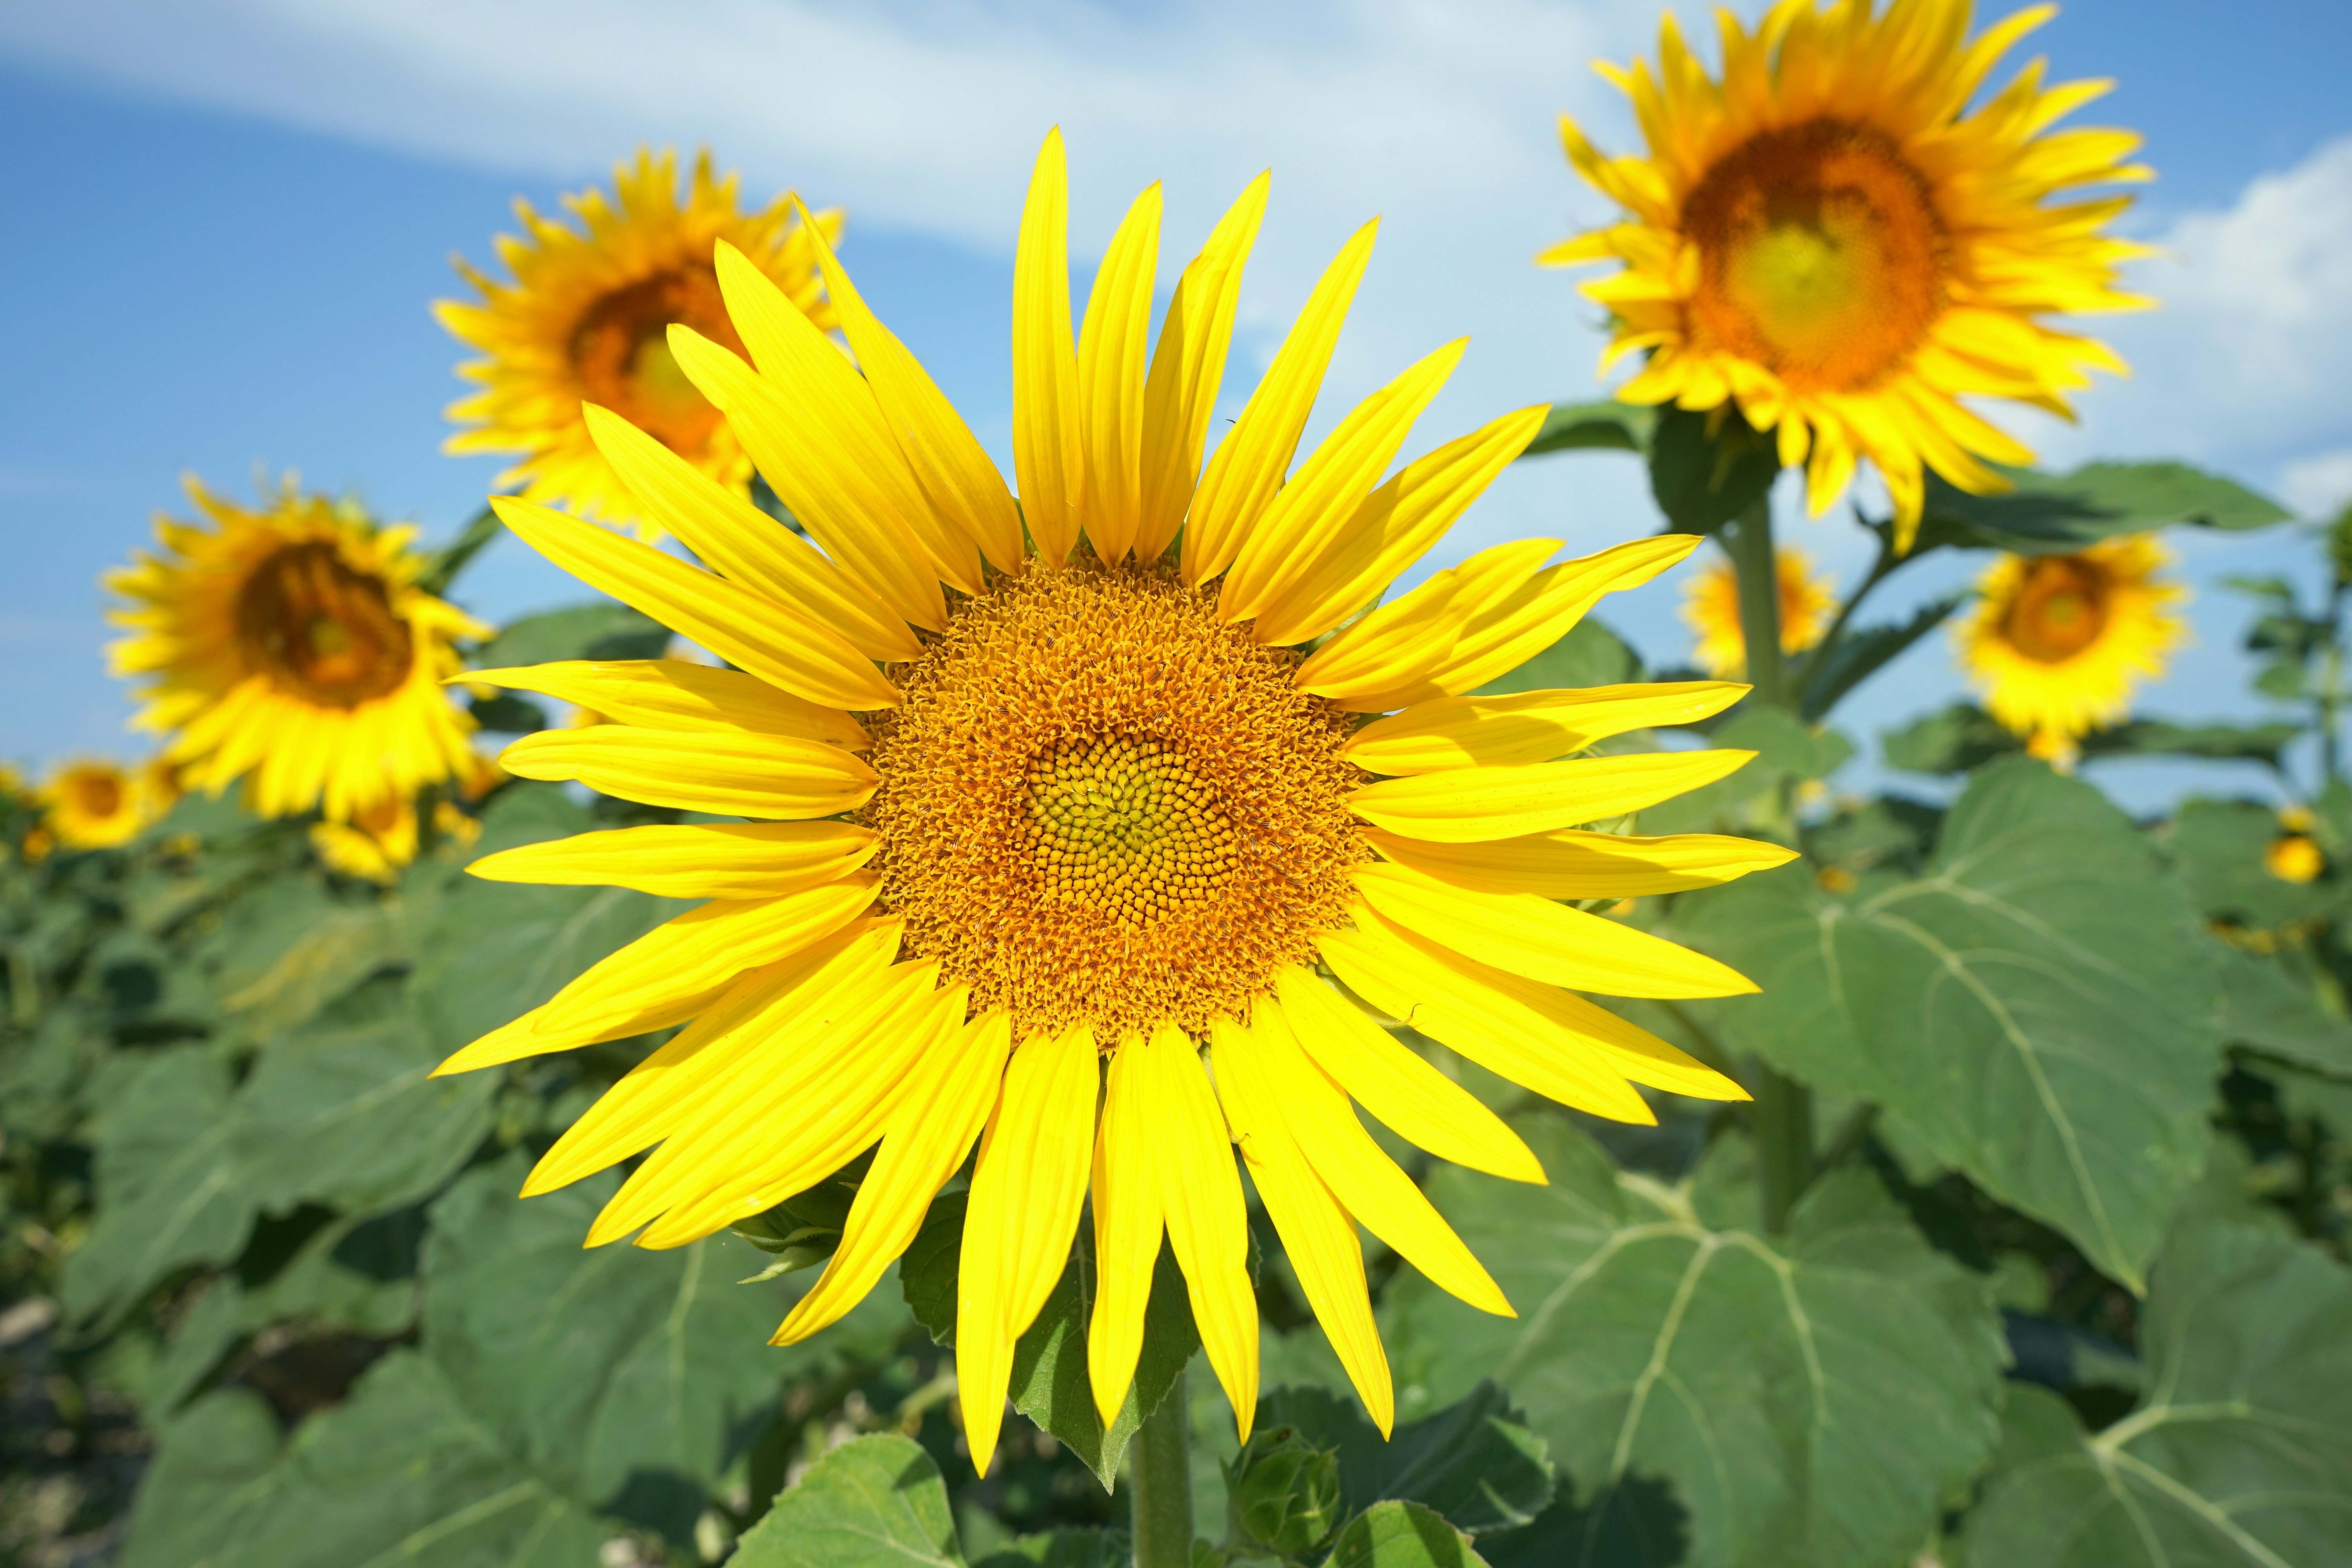 macro photography of yellow sunflowers under blue and white skies